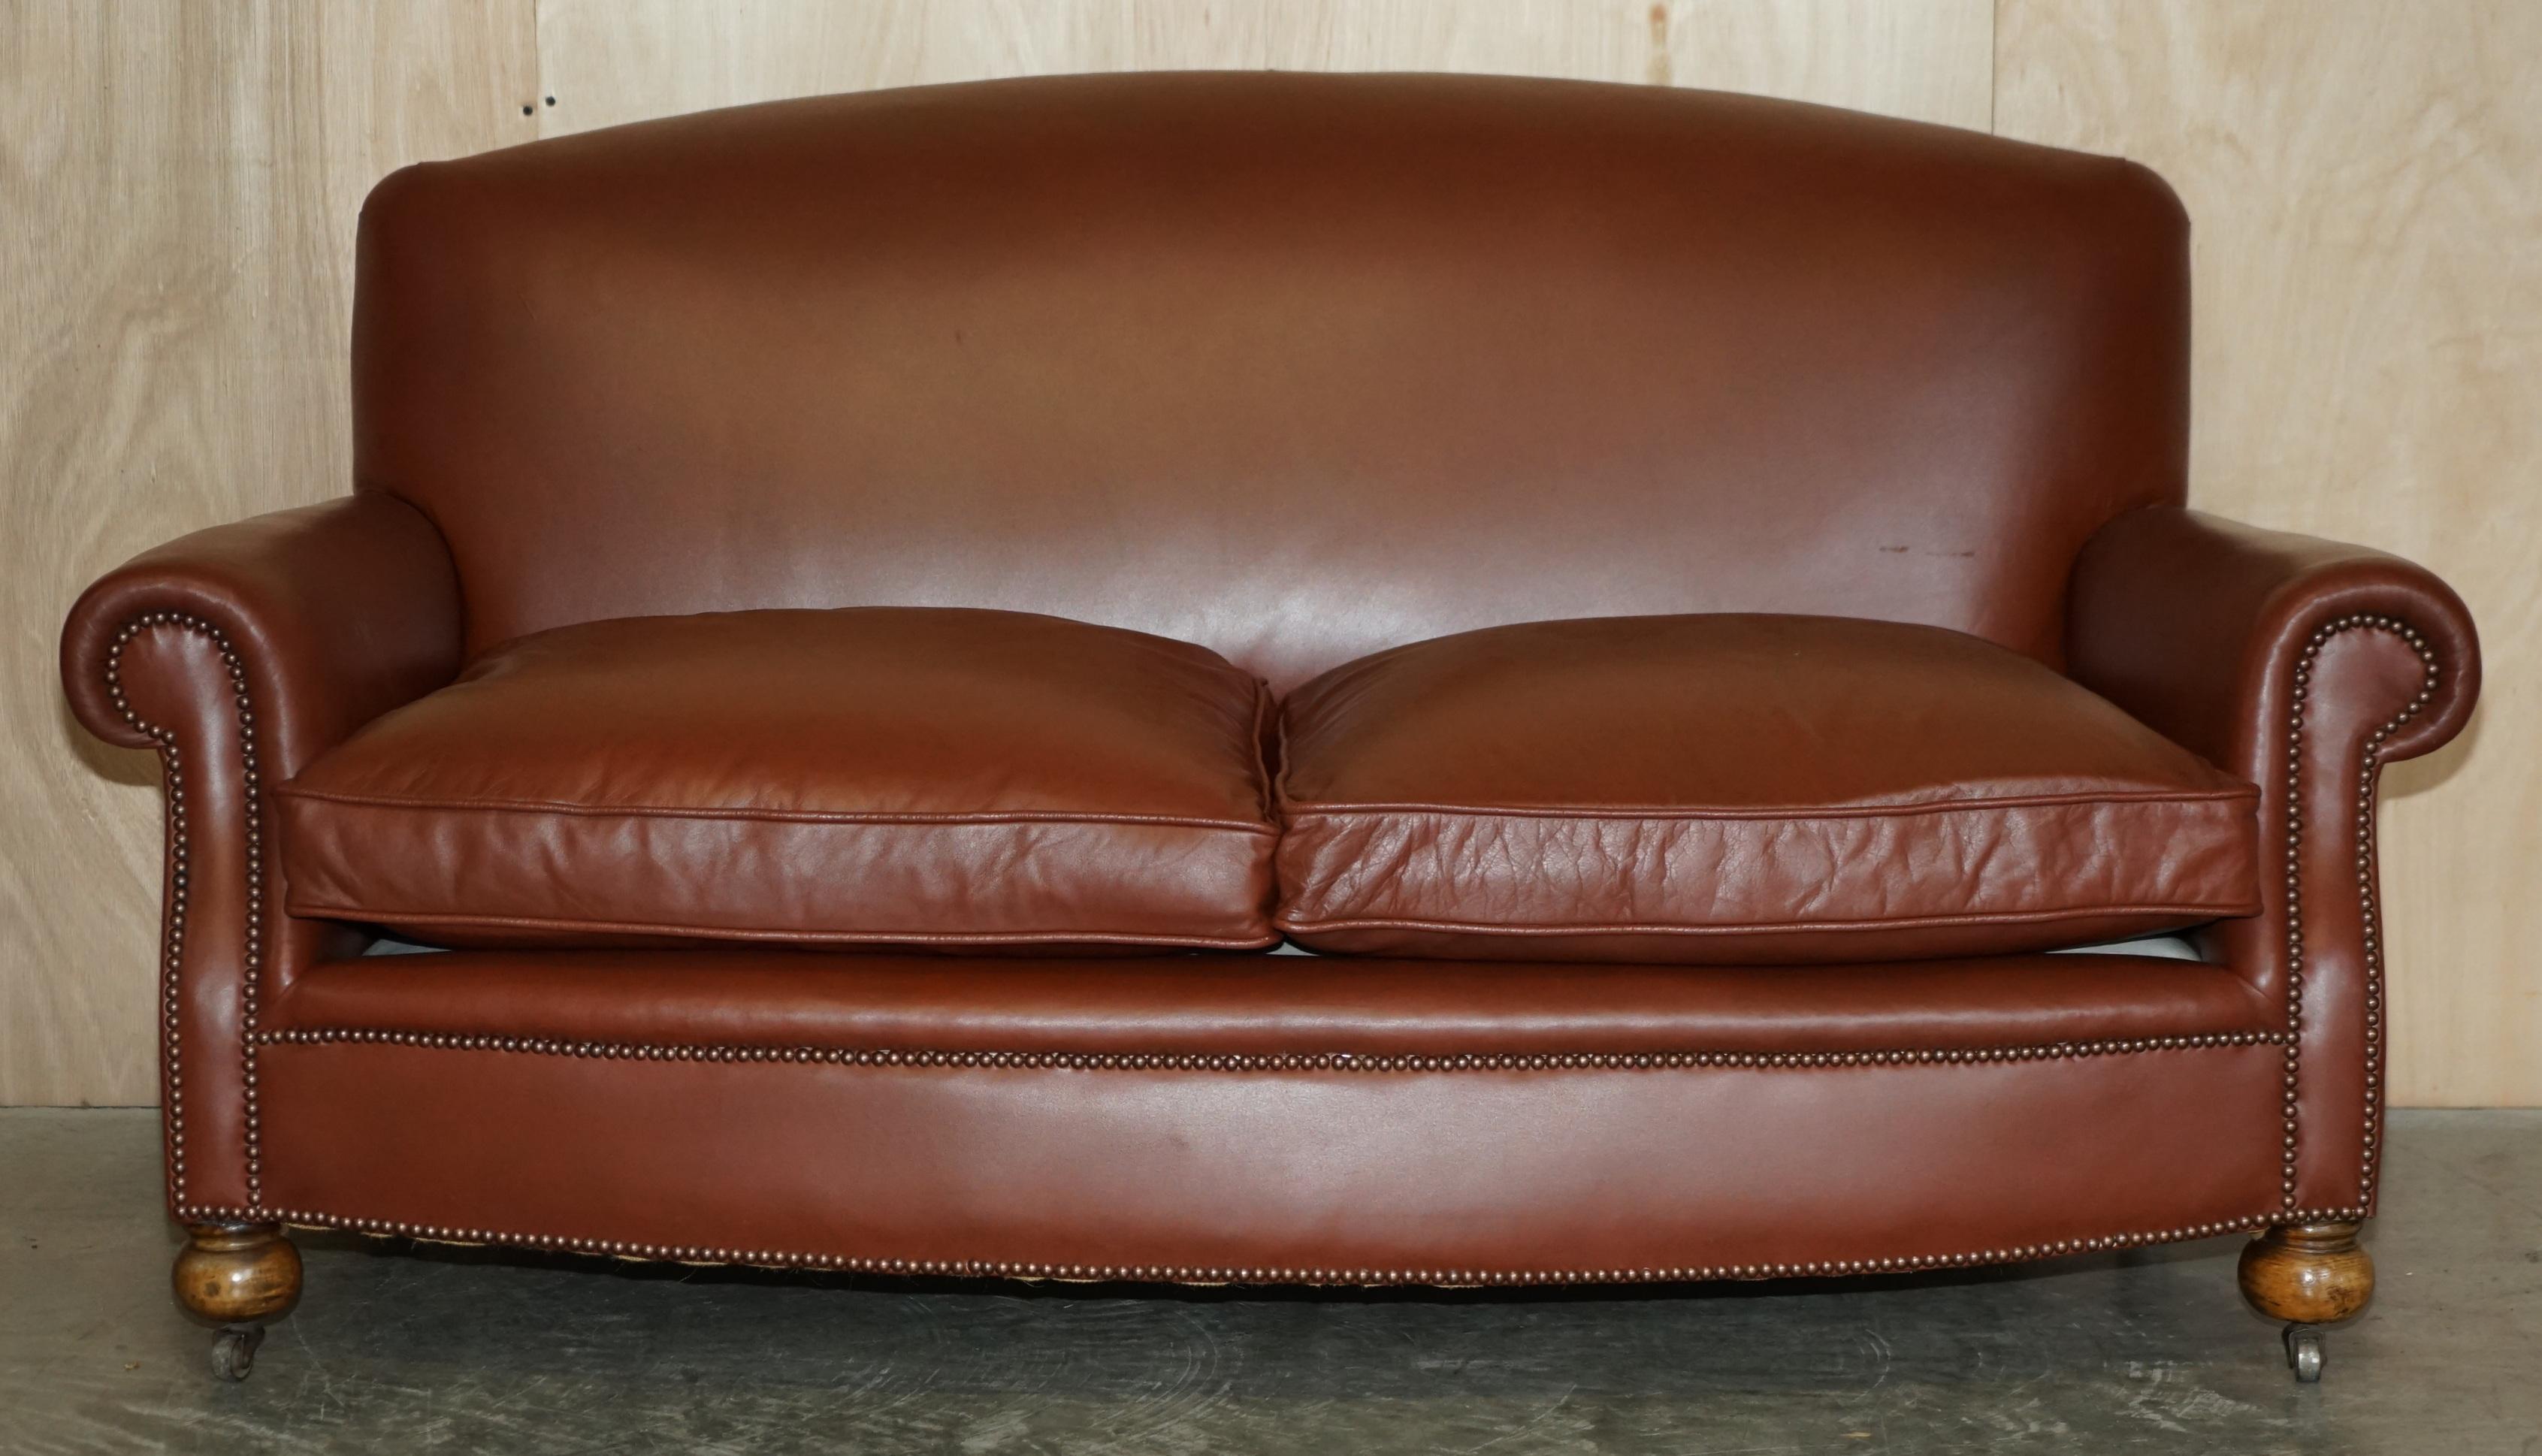 We are delighted to offer for sale this lovely circa 1910 Edwardian English Oak and cognac brown Leather club sofa which is part of a suite

The sofa is very stylish and comfortable, it has double sided feather filled cushions with air vent holes